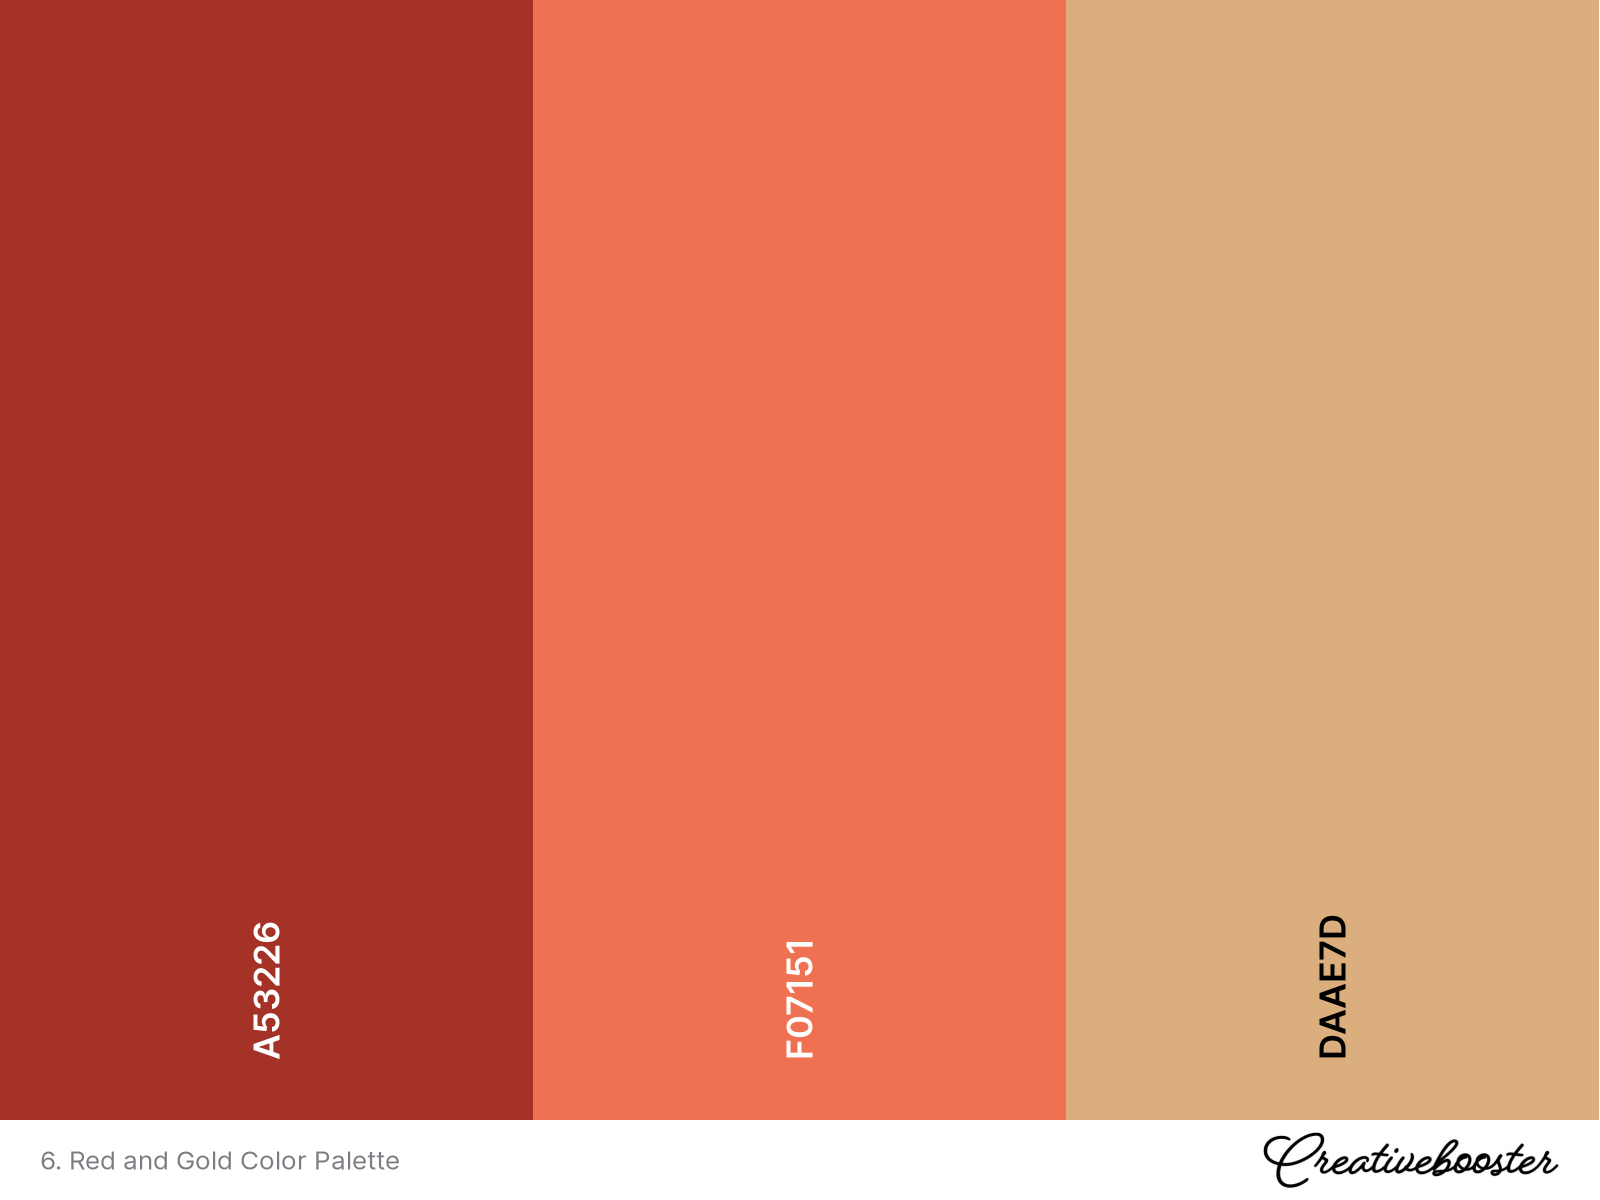 6. Red and Gold Color Palette